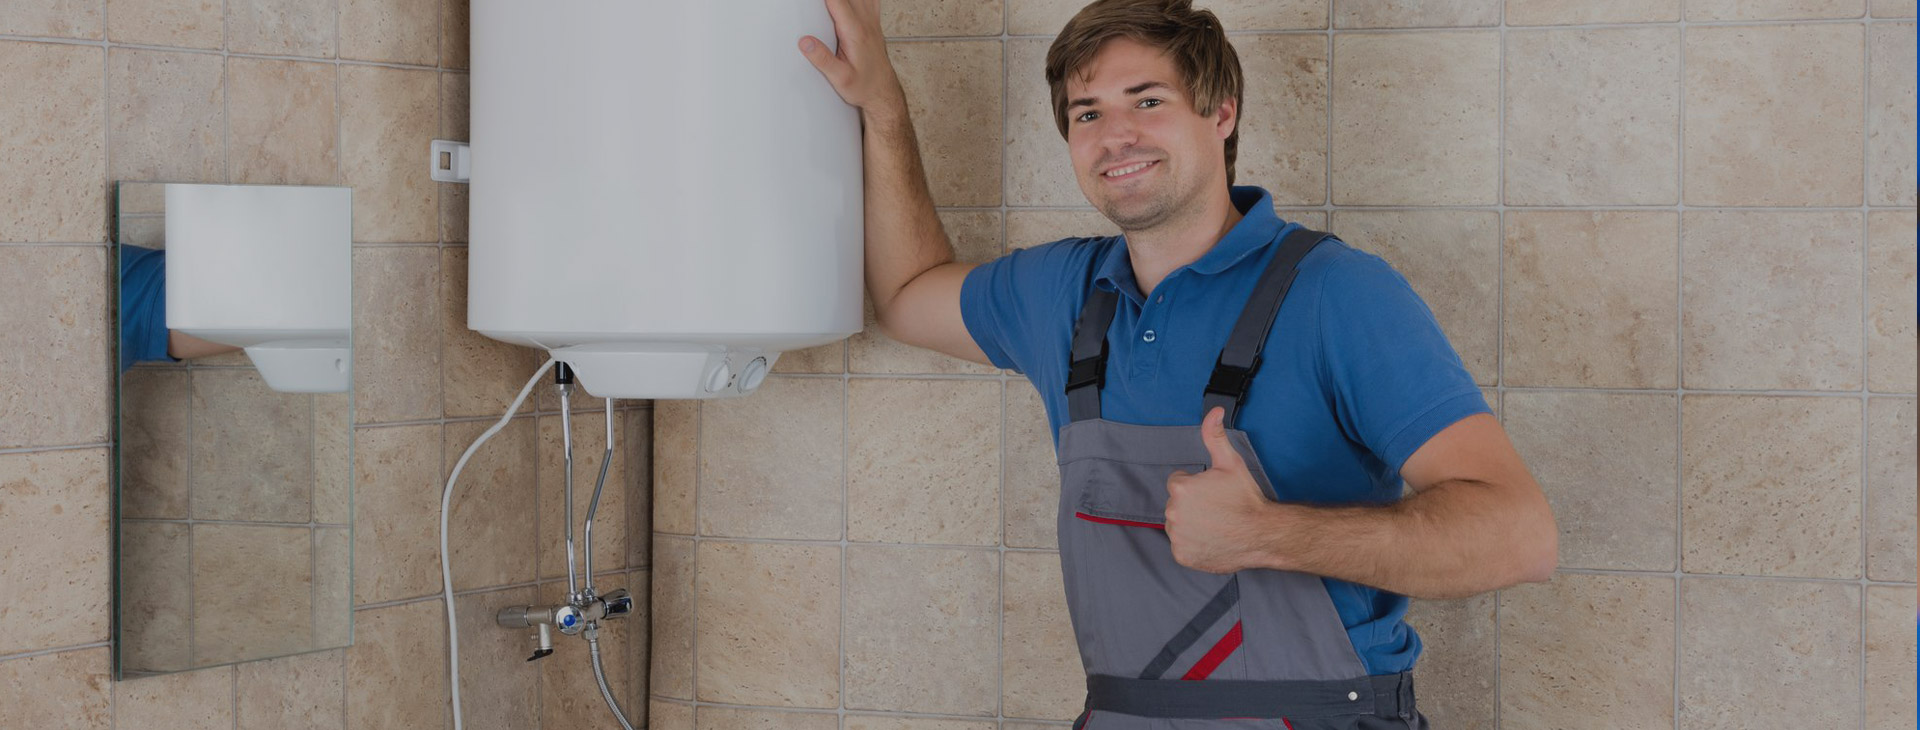 water heater replacement banner